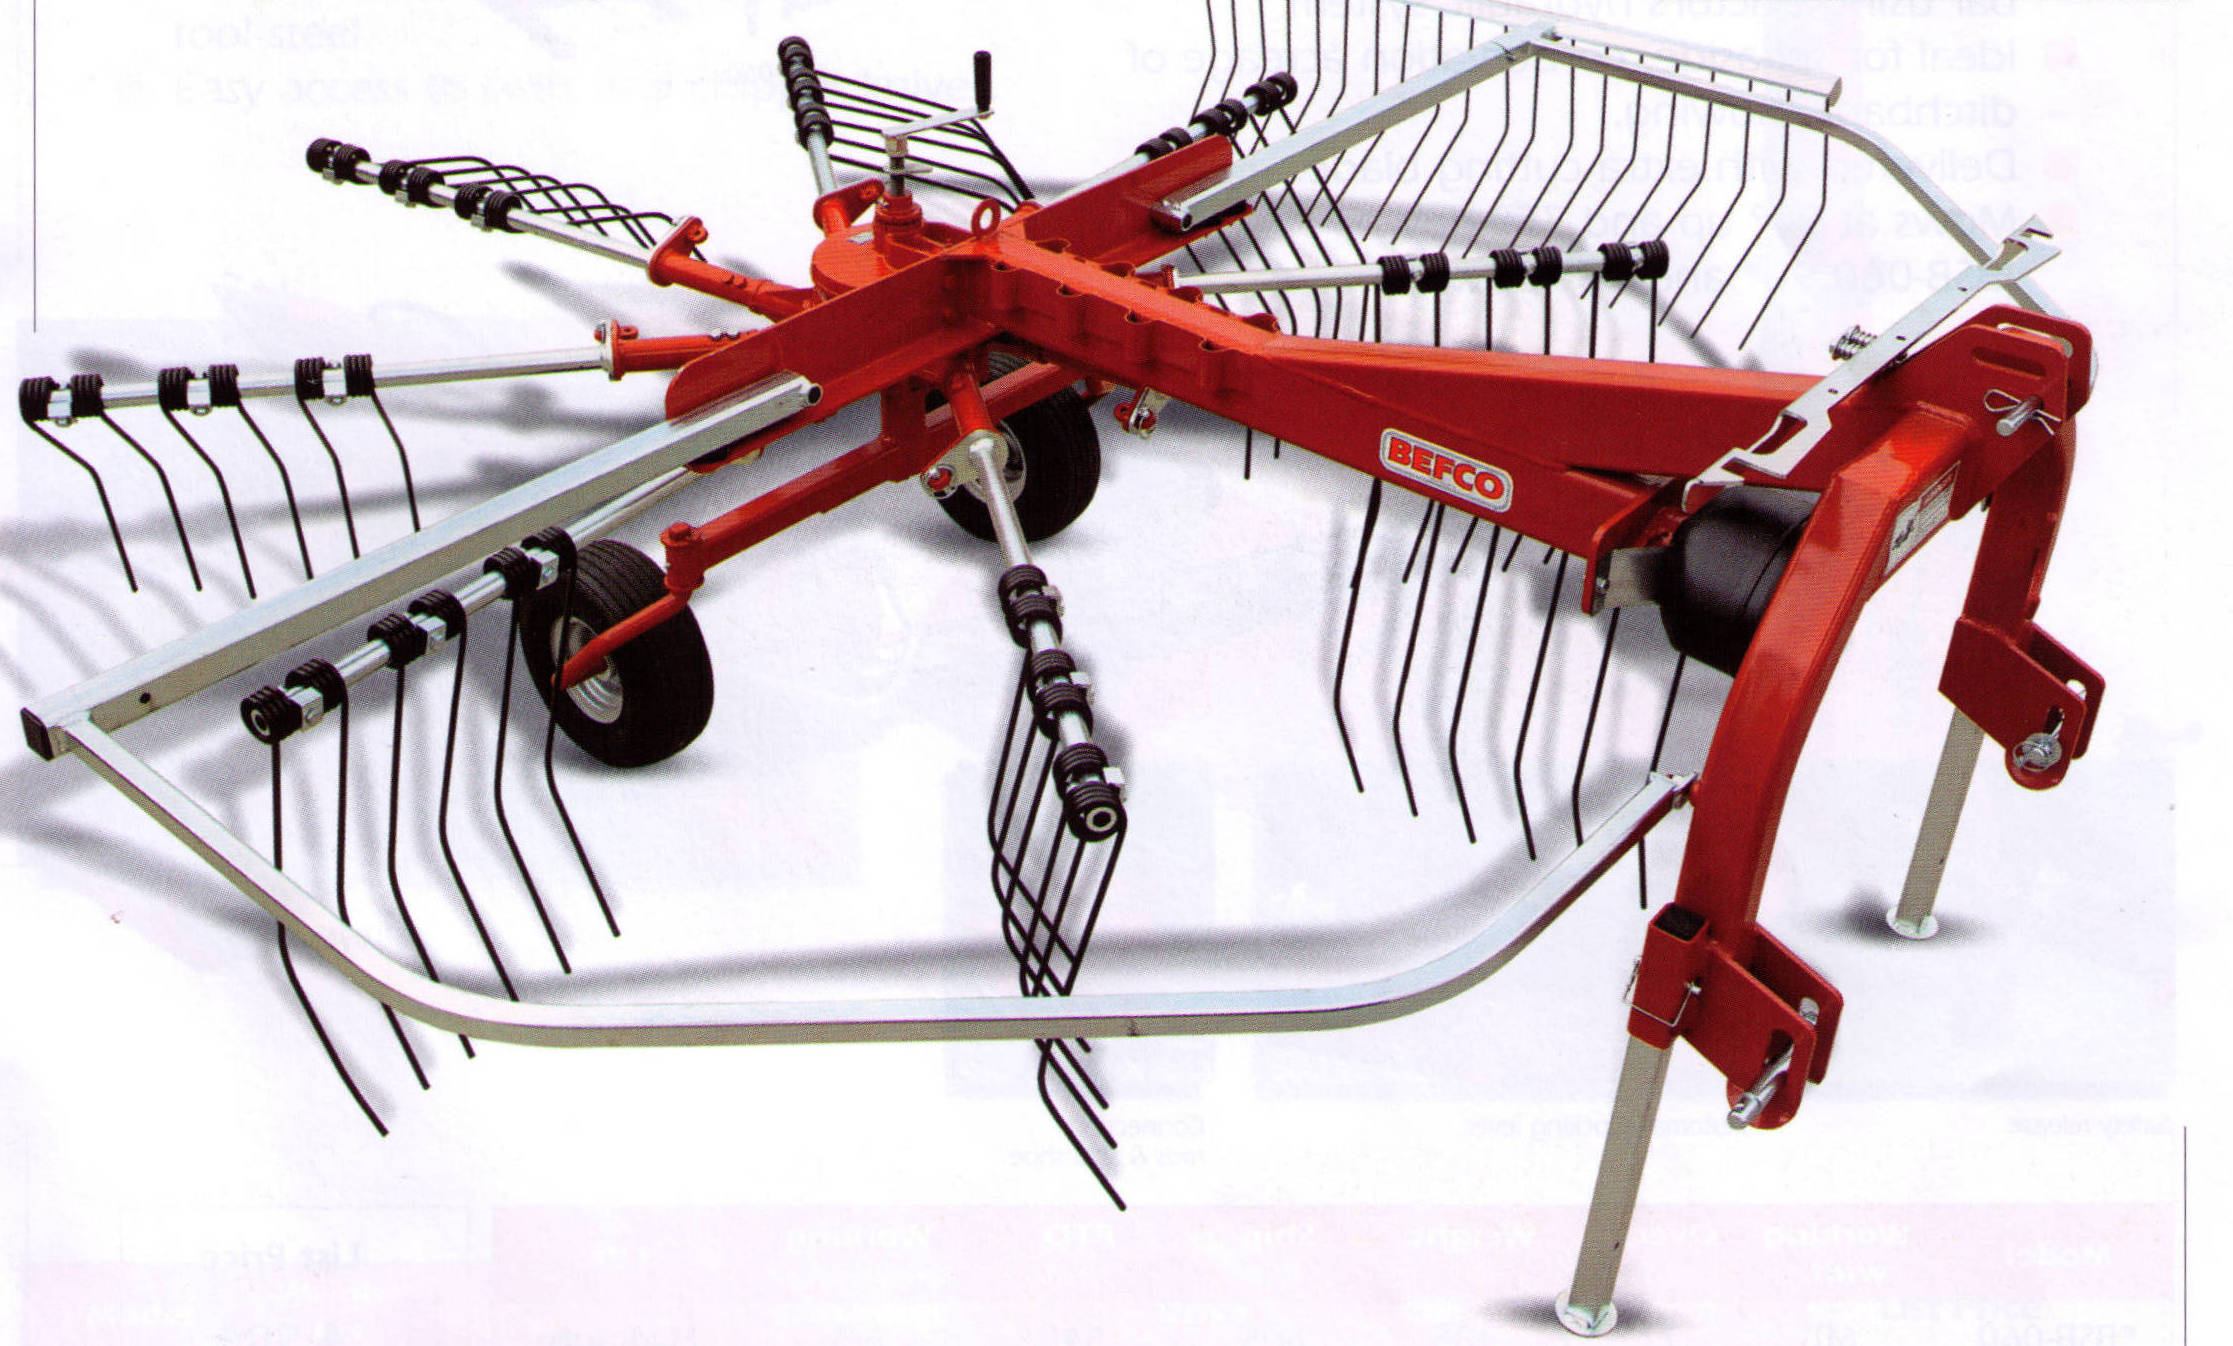 Befco Three Point Hitch Mount Windrower Rake, PTO Powered